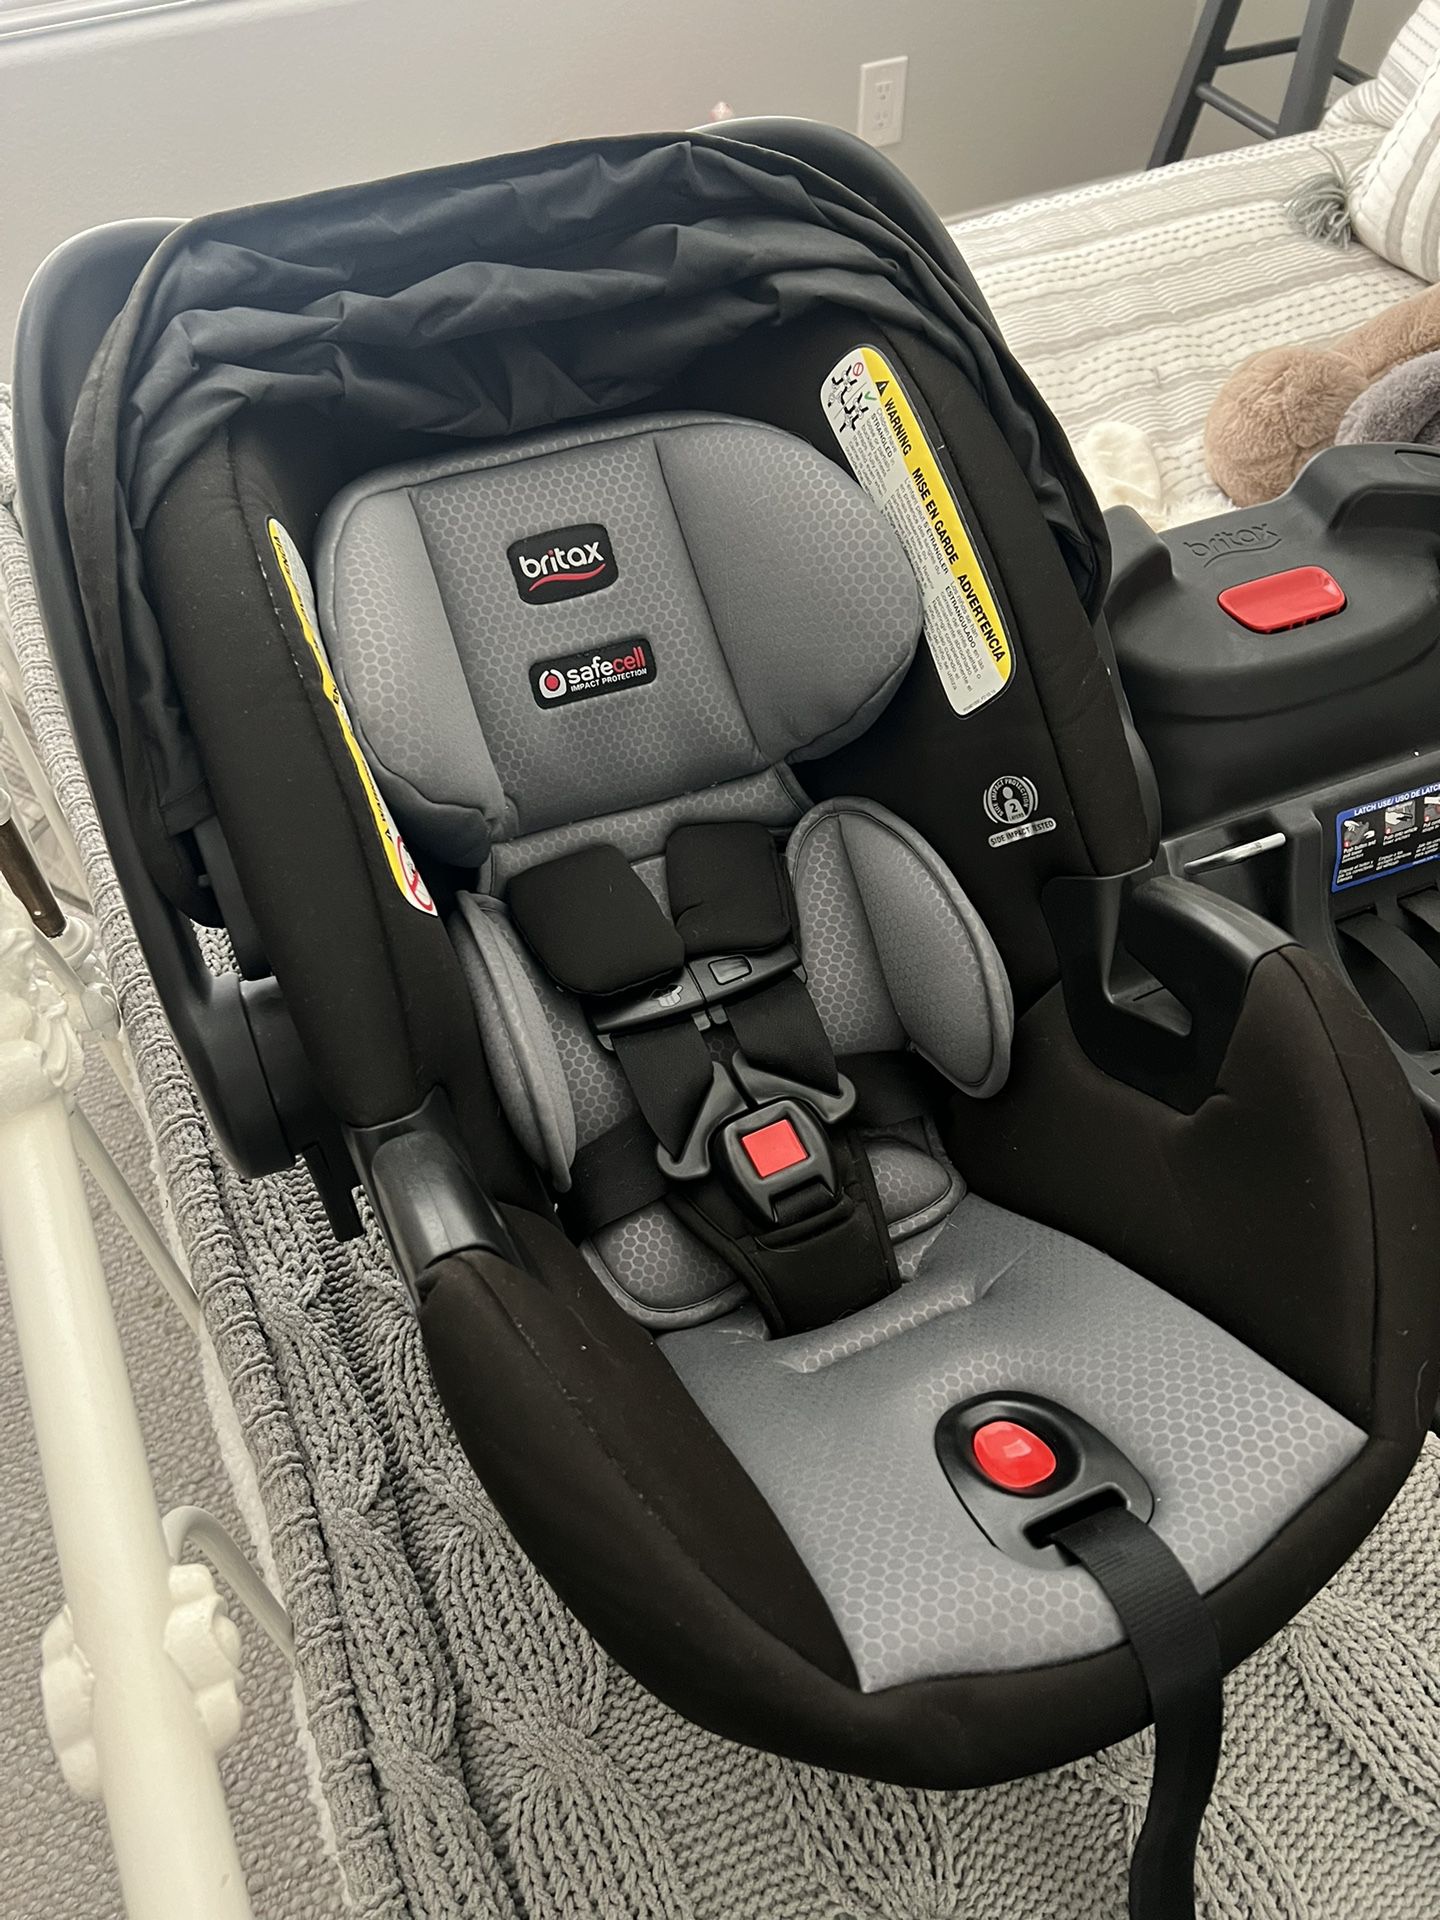 REDUCED PRICE— Britax Travel System And Extra Base